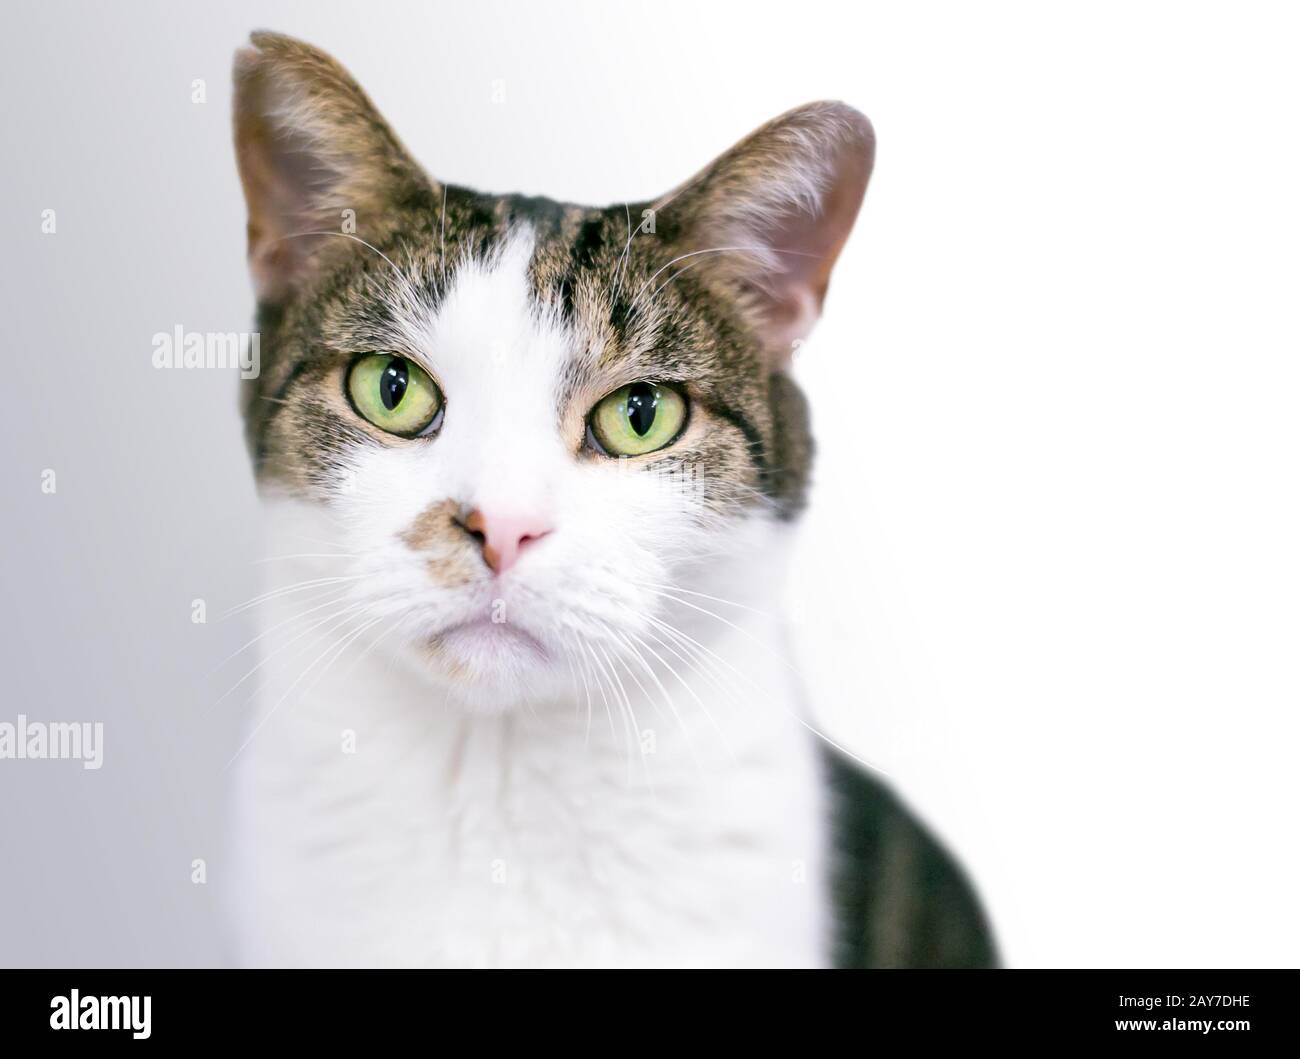 A domestic shorthair cat with brown tabby and white markings, and green  eyes Stock Photo - Alamy